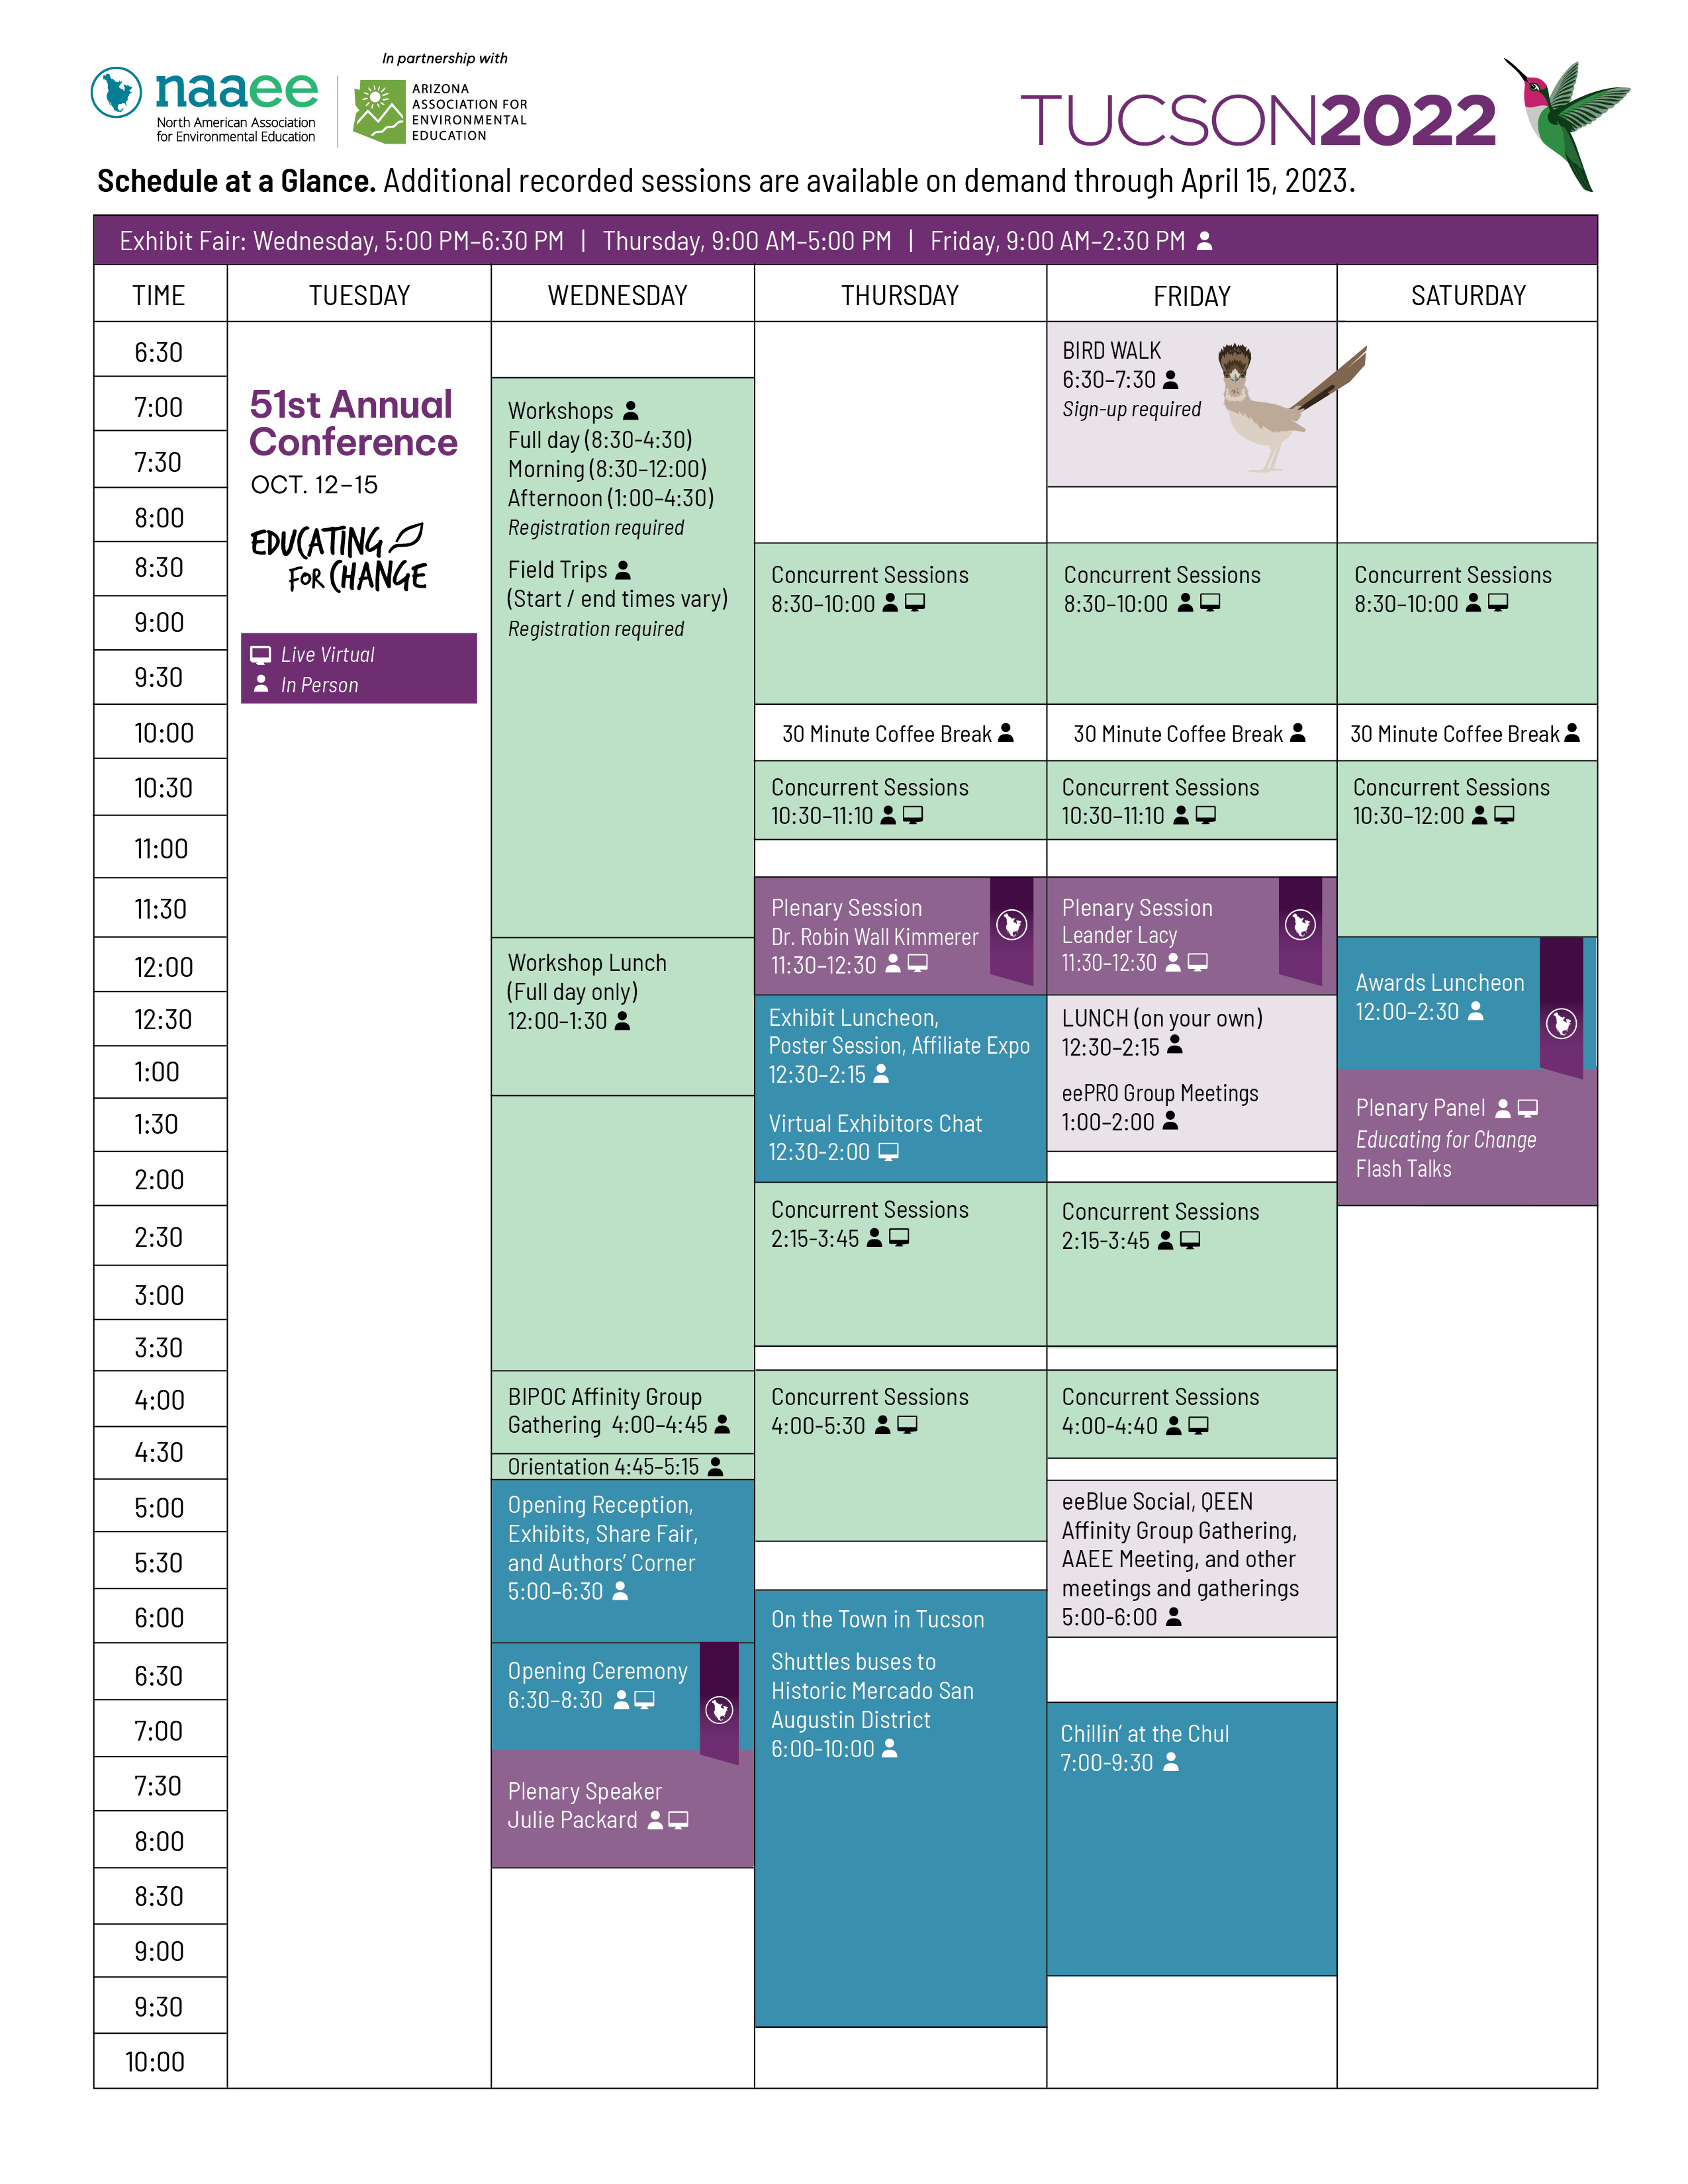 Schedule at a Glance NAAEE Conference